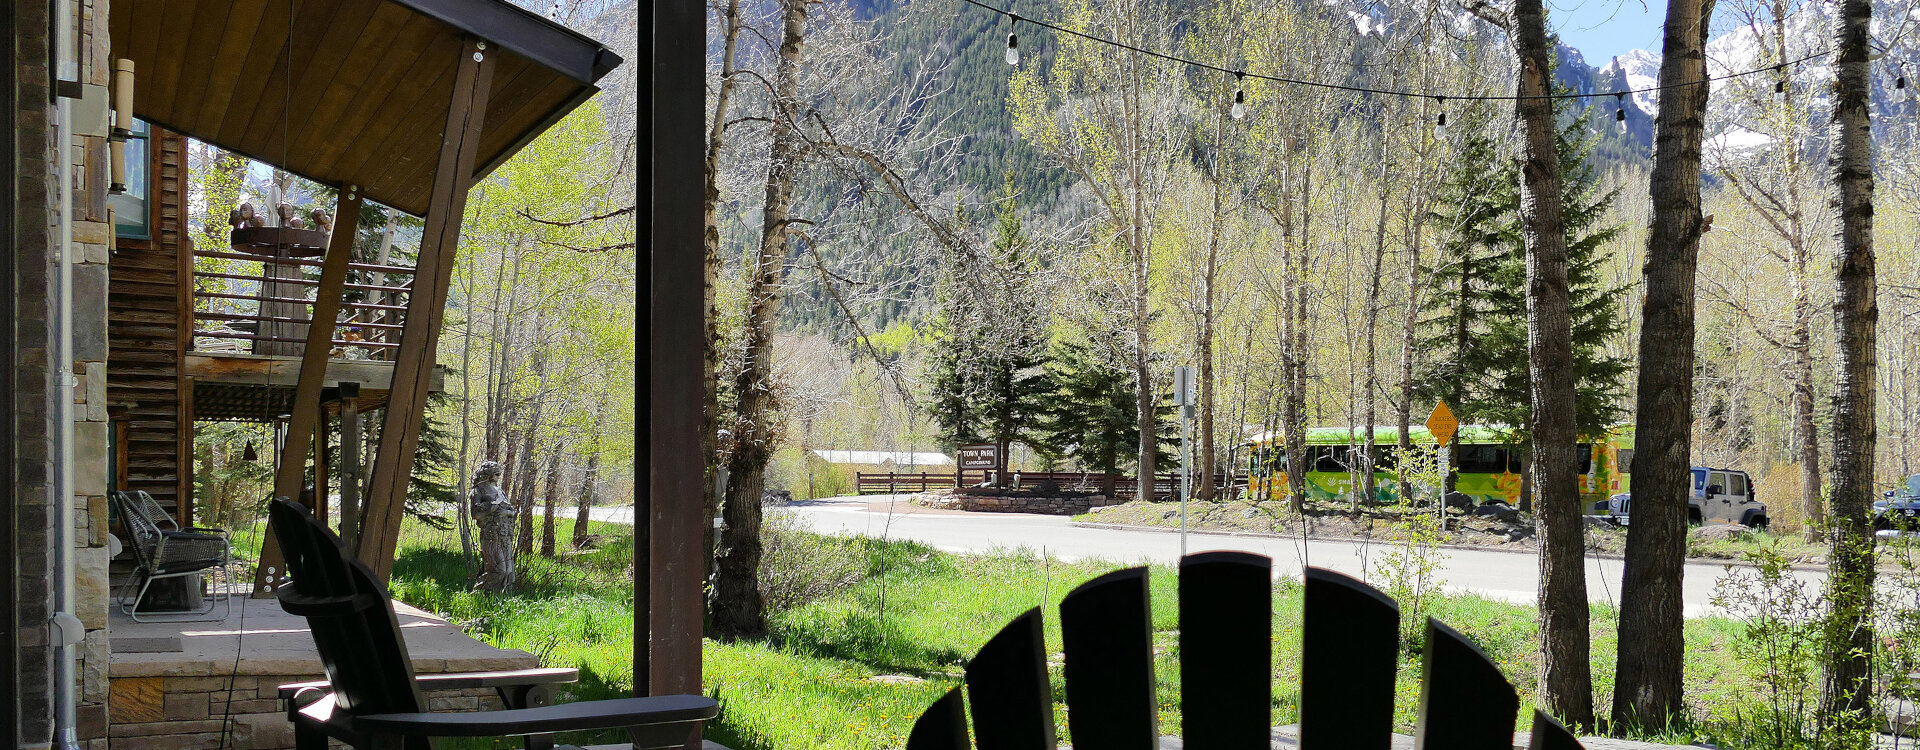 2.01-telluride-parkside-retreat-front-deck-chairs